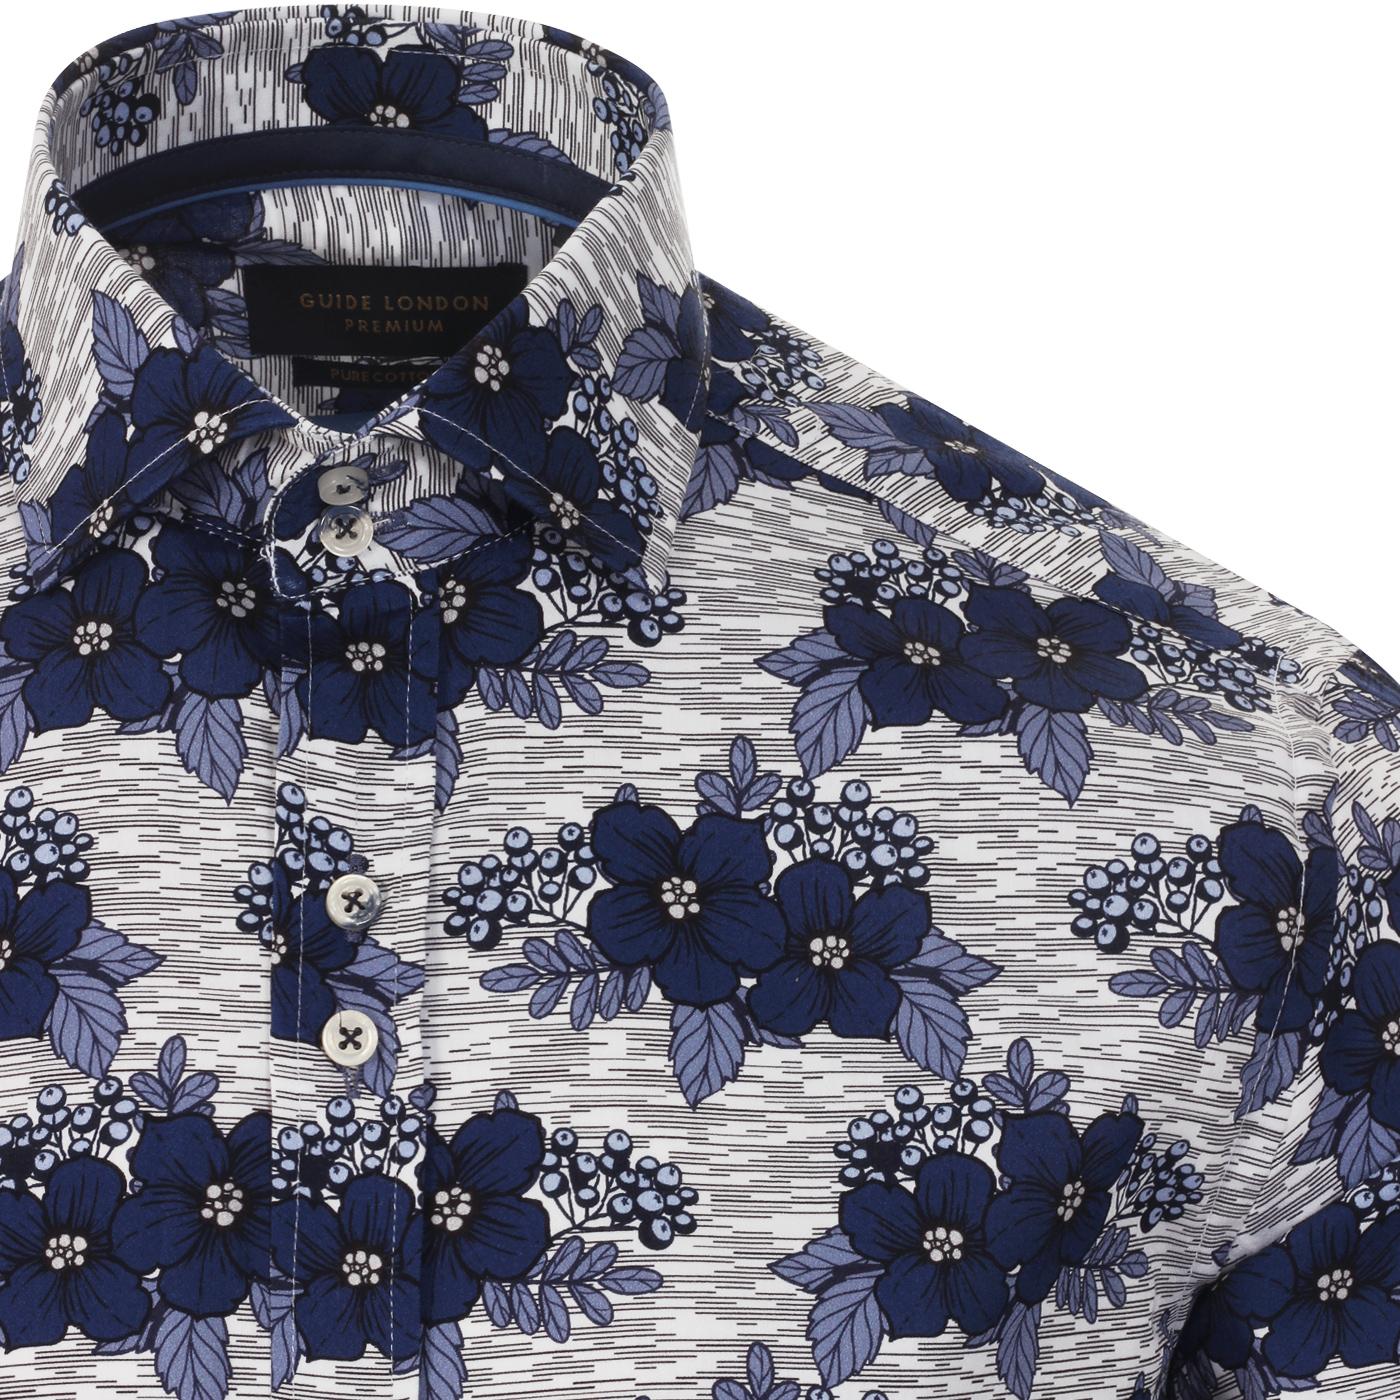 GUIDE LONDON Retro 70's Bold Floral Print Shirt in Navy